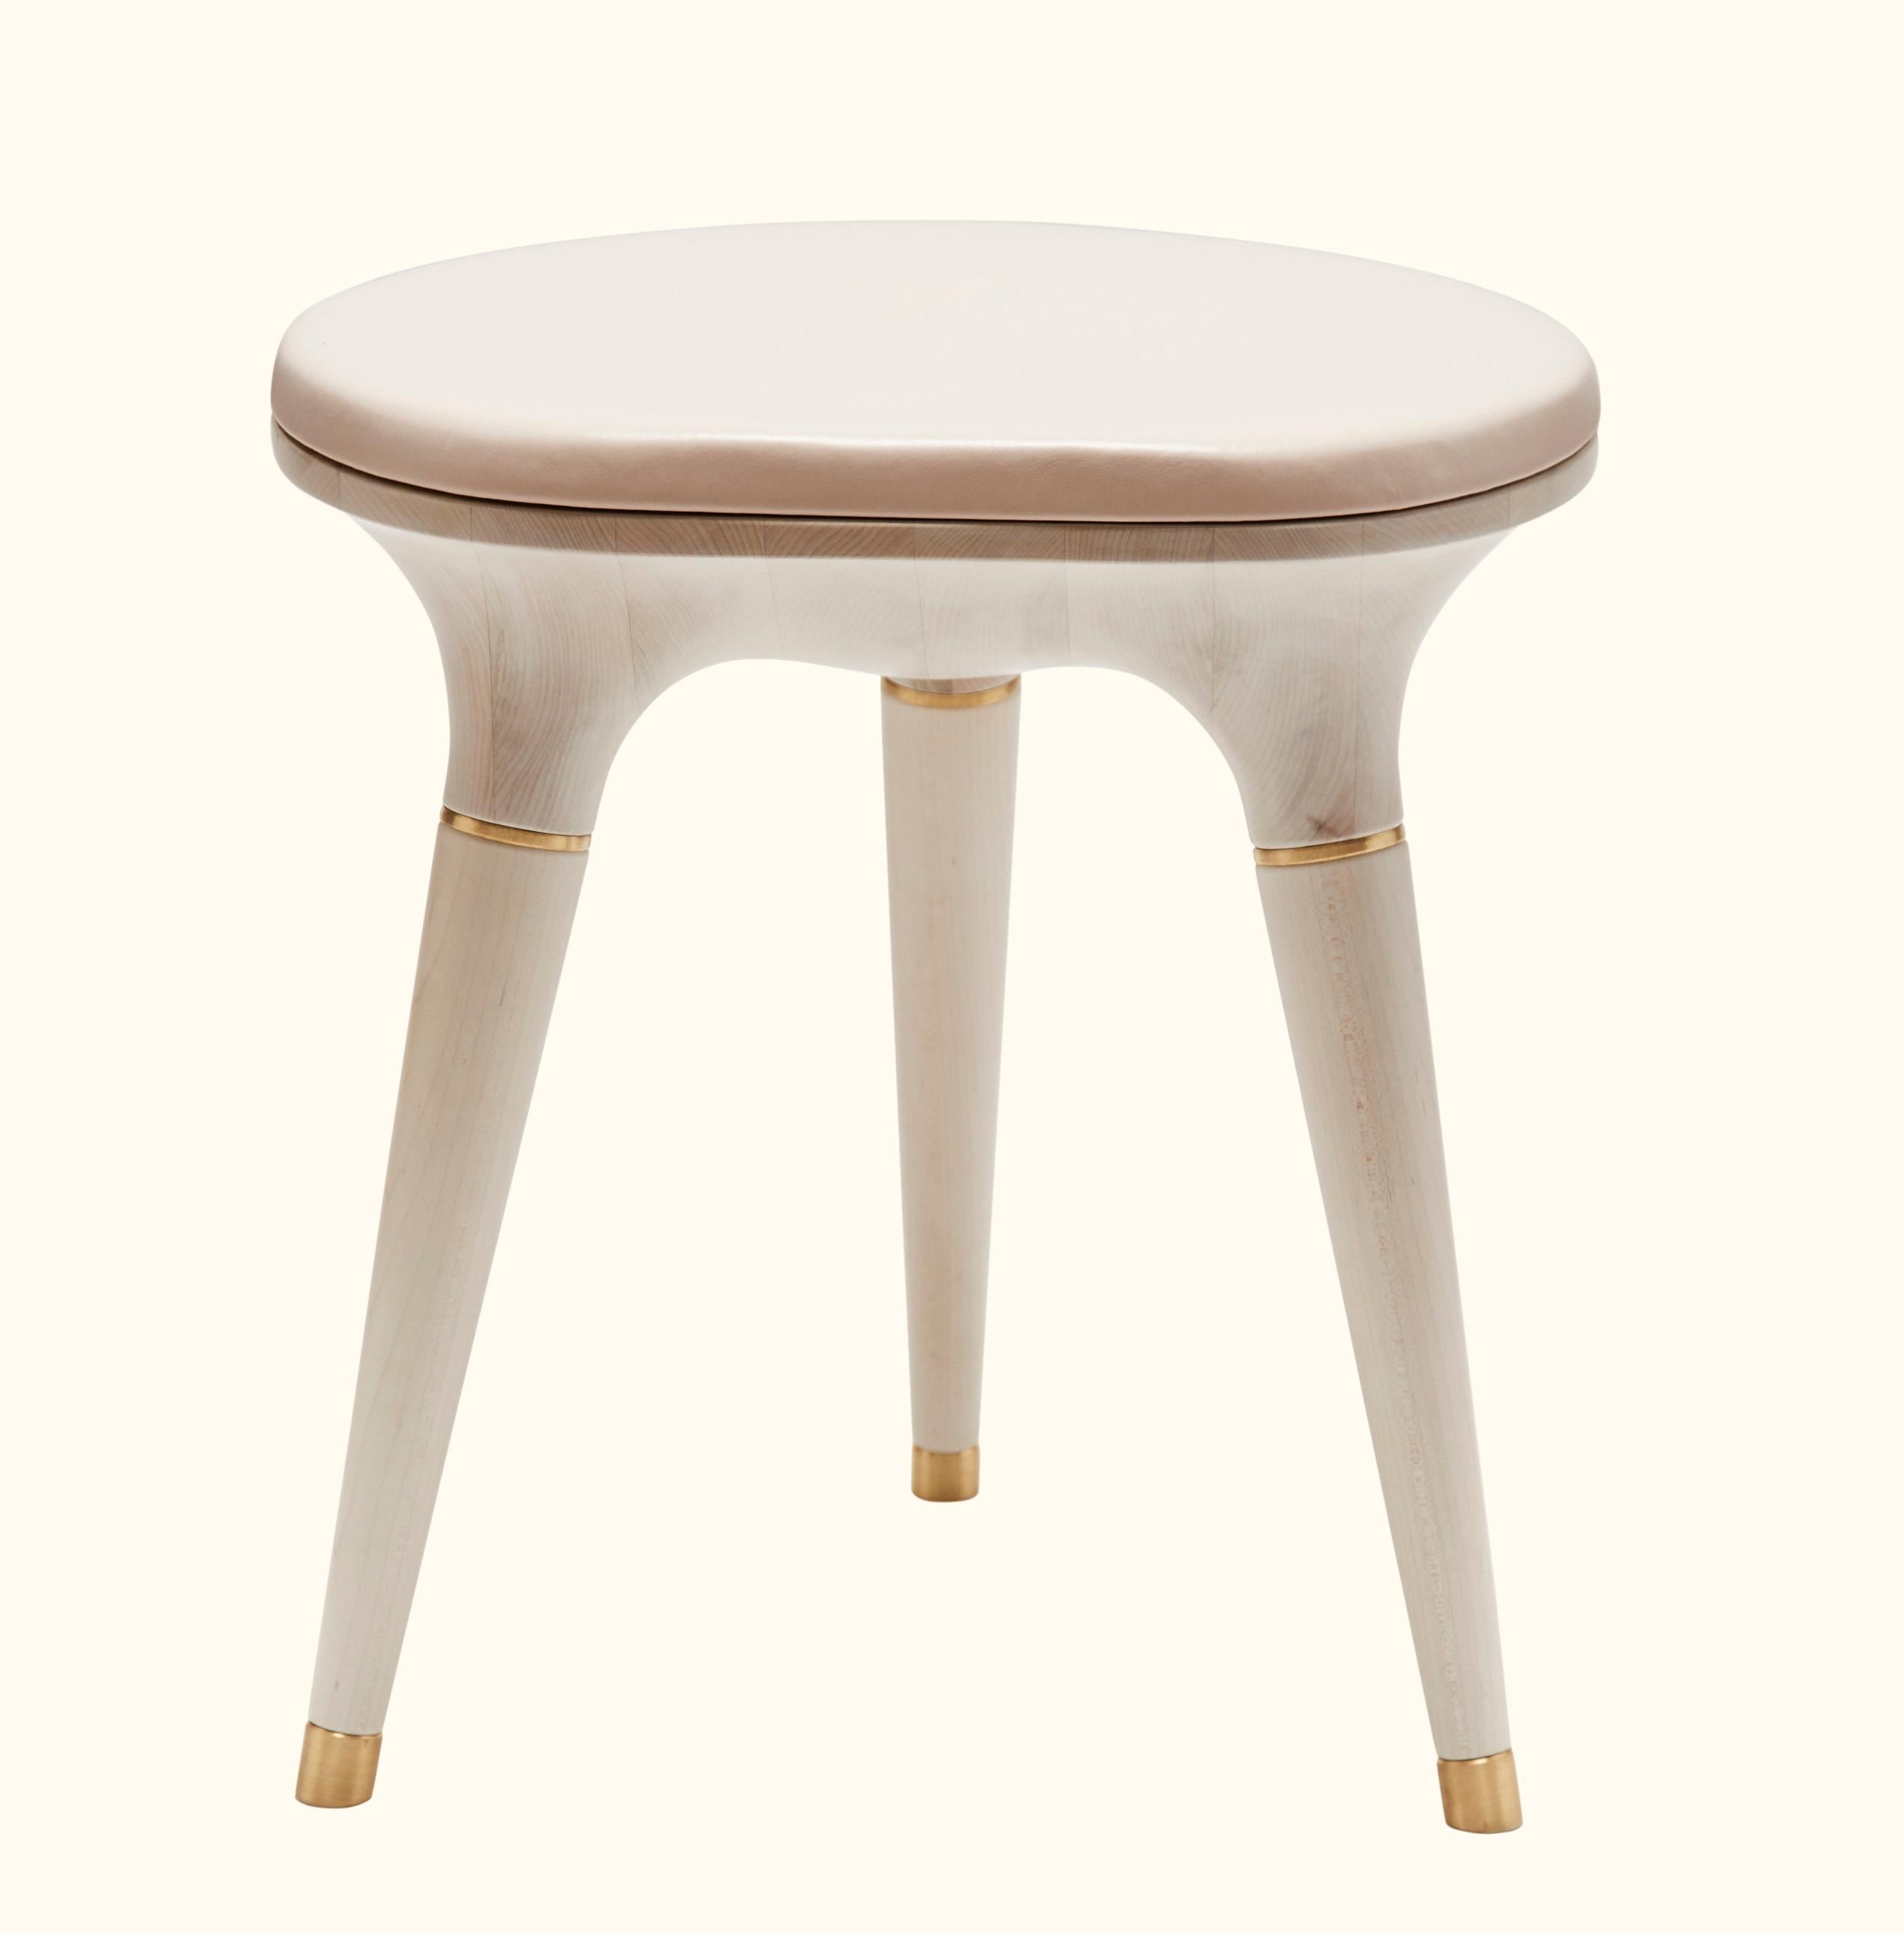 Mid-Century Modern Bleached Stool 001 by Vincent Pocsik for Lawson-Fenning